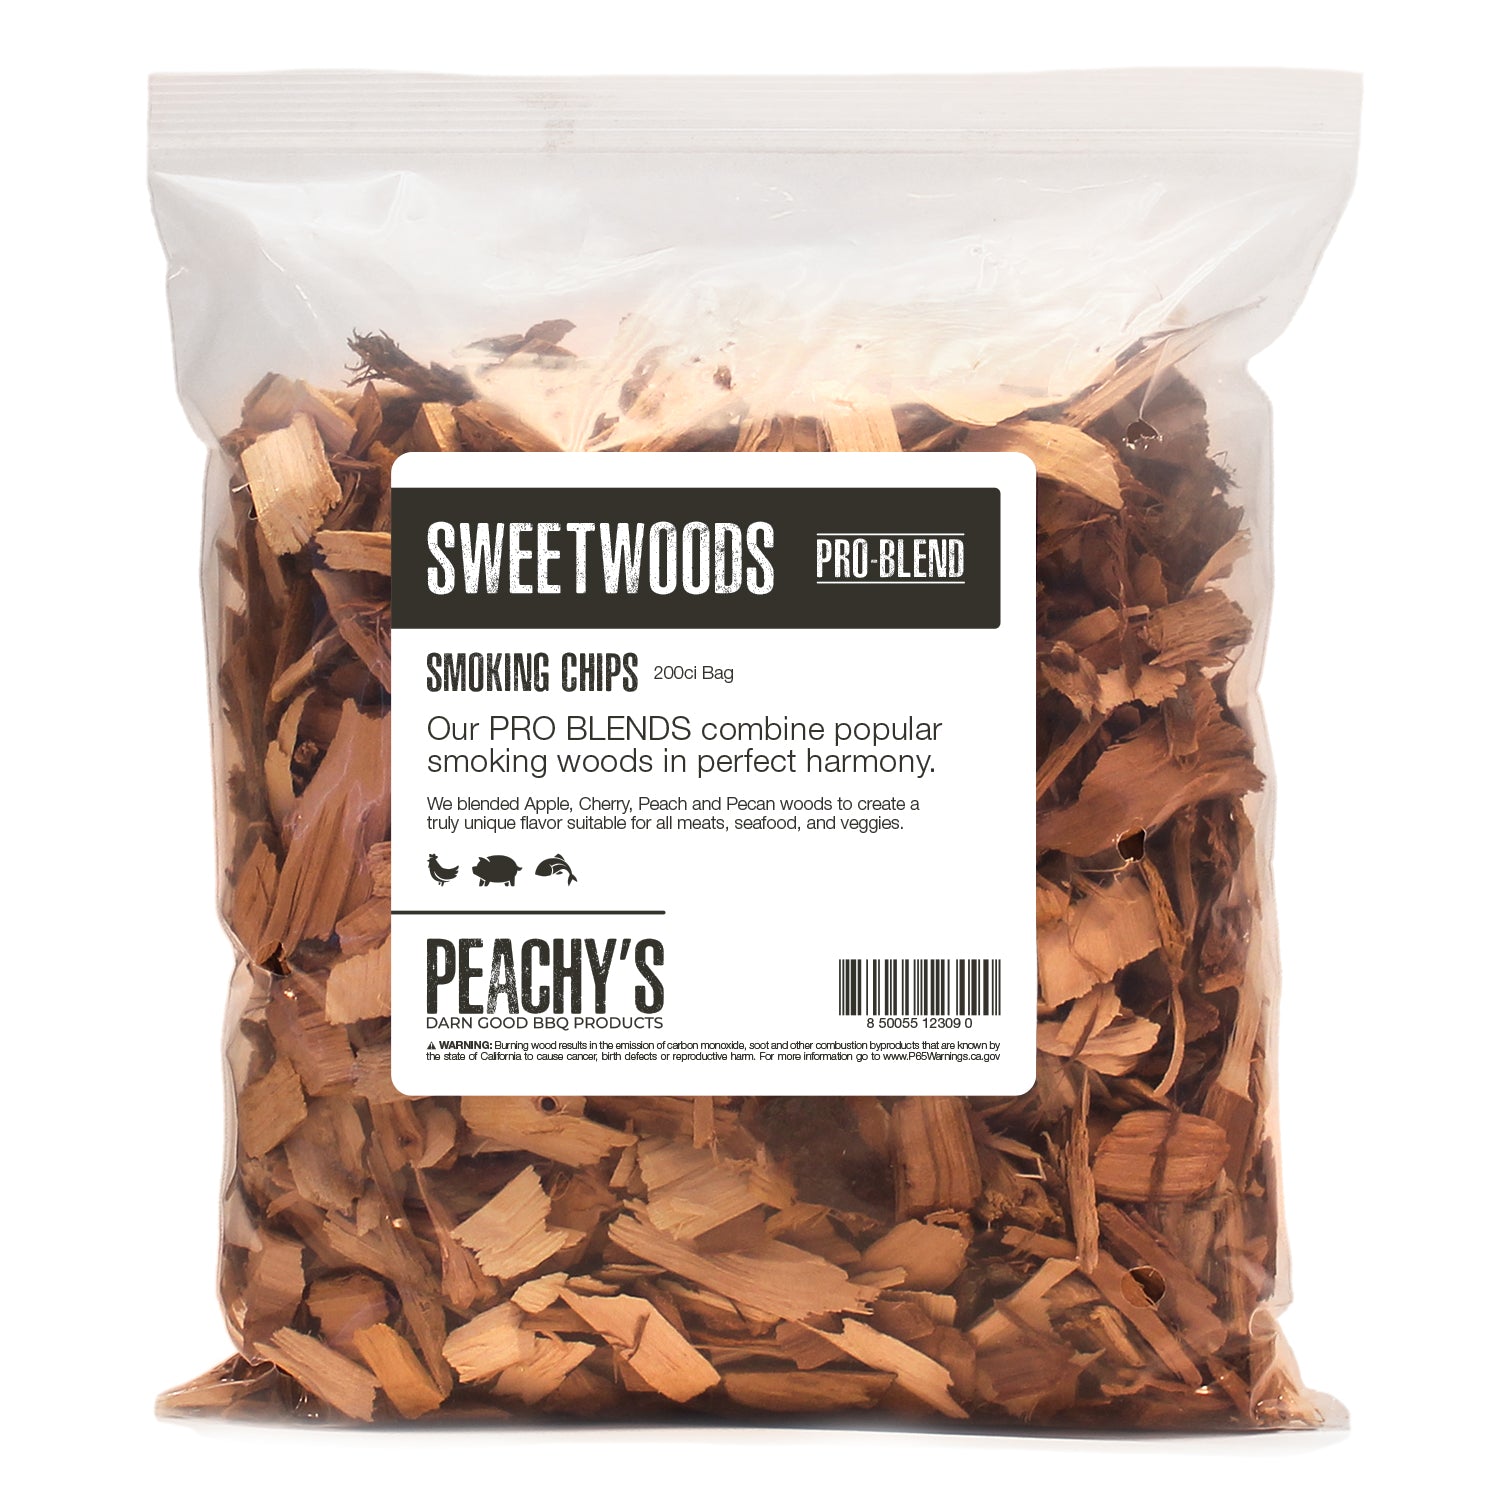 SWEETWOODS PRO-BLEND Chips | 200ci Bag of Premium Smoking Woods by PEACHY'S